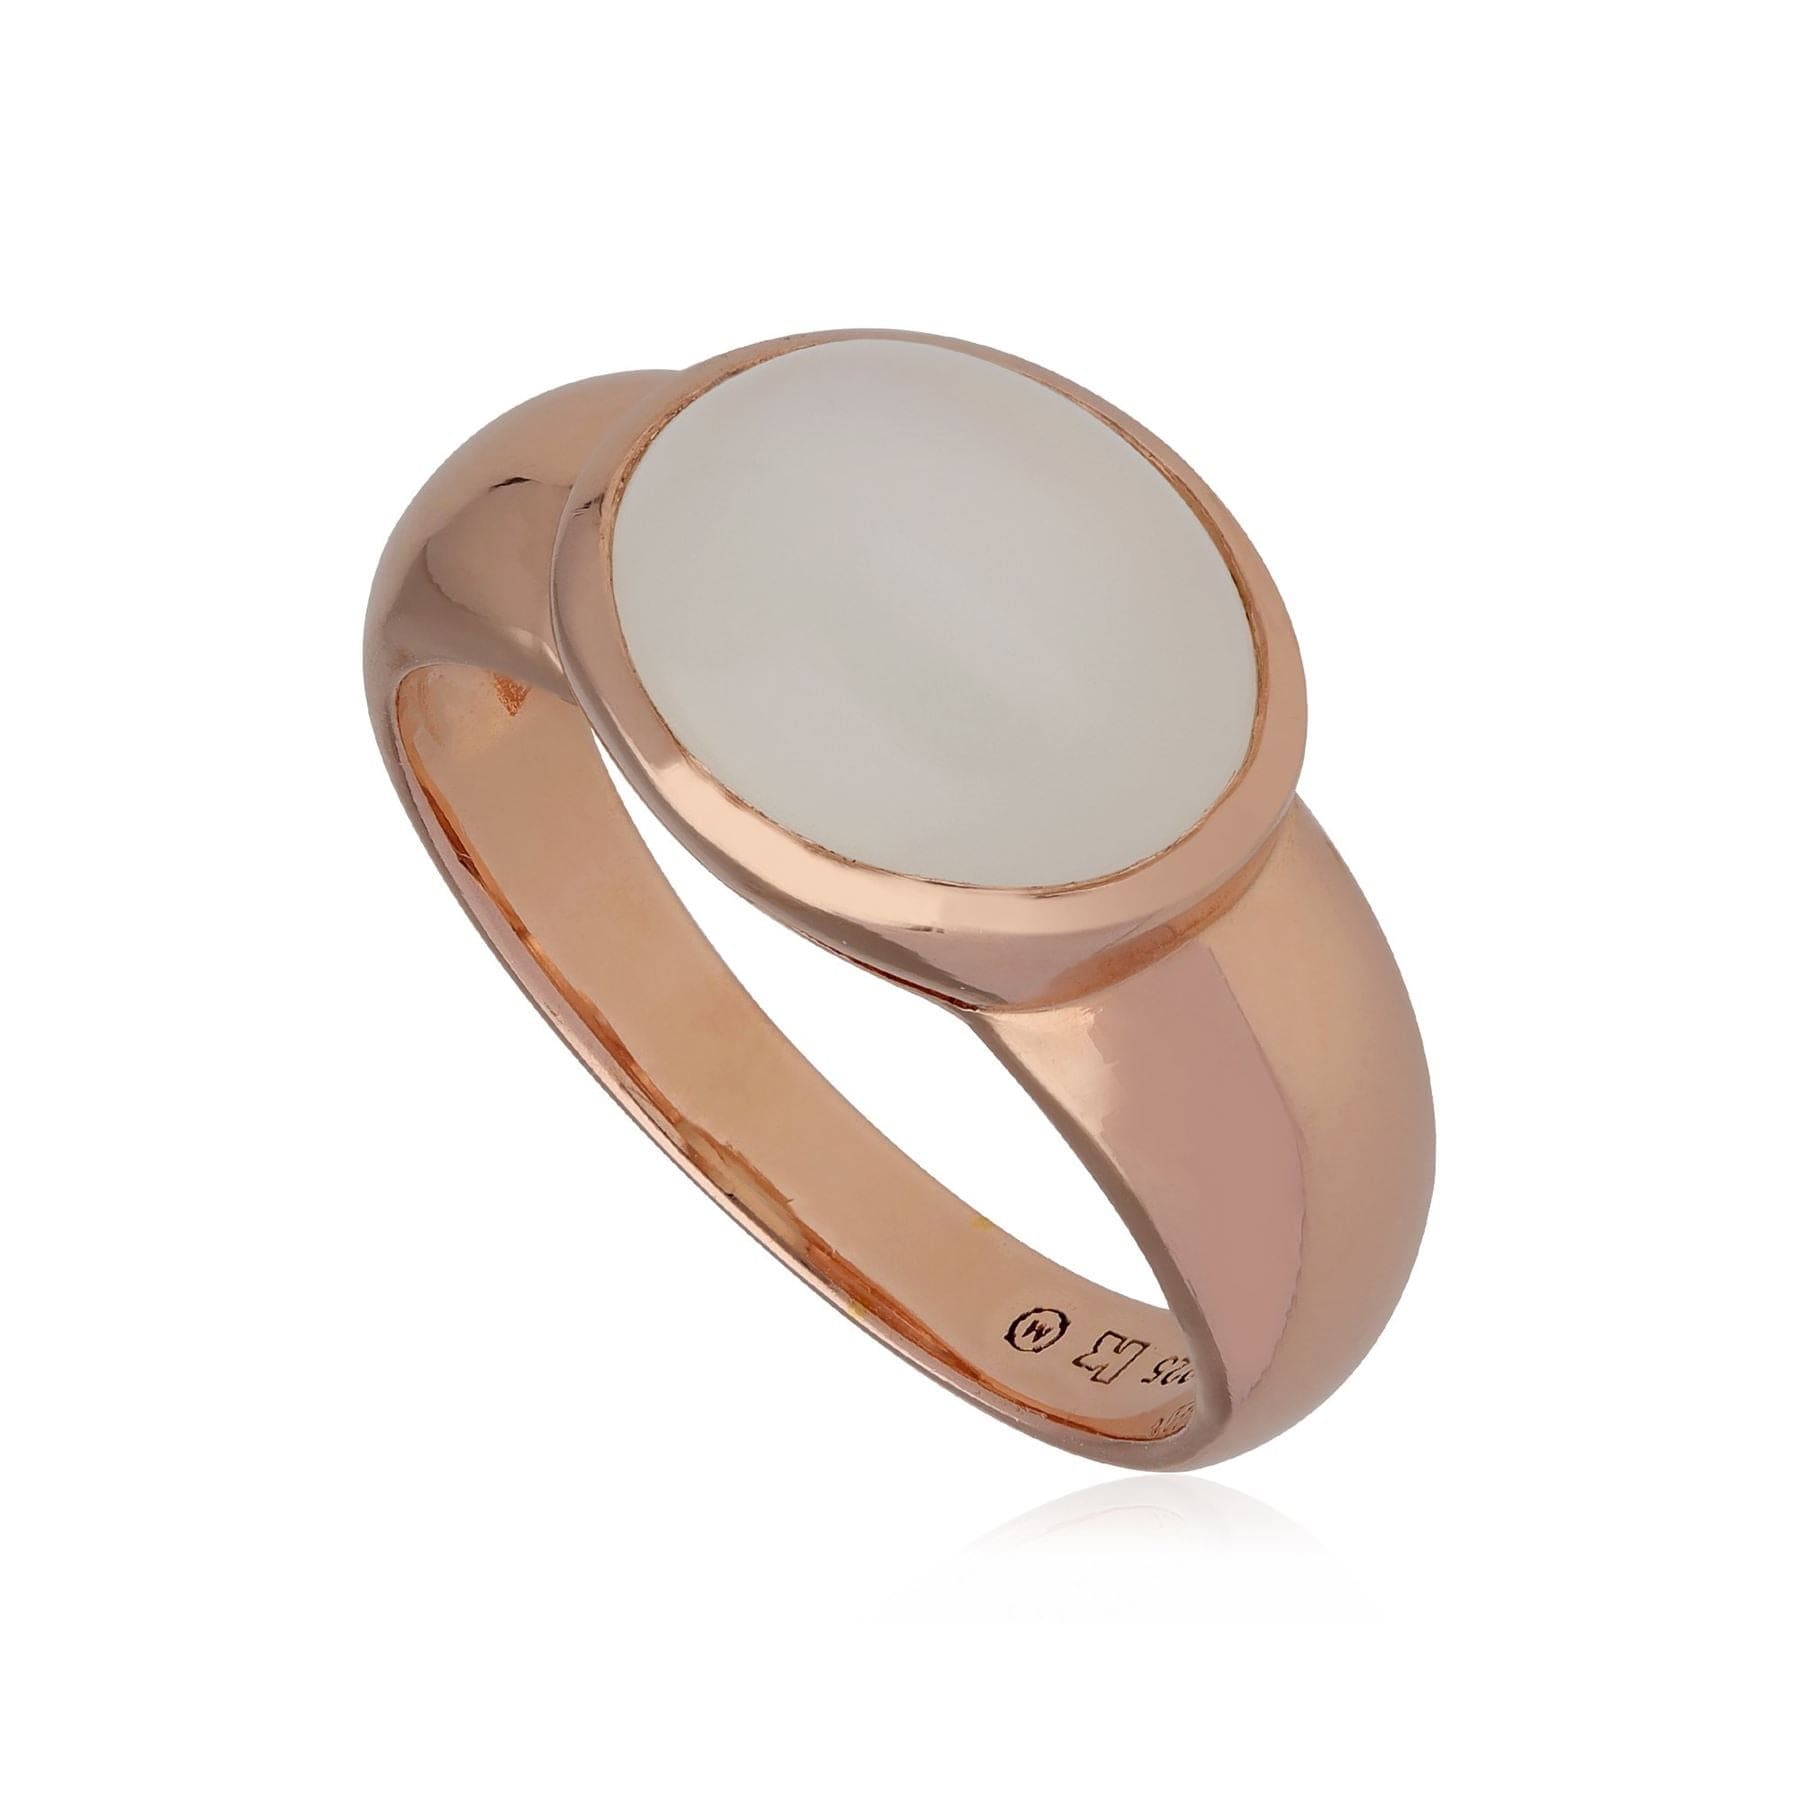 Kosmos Moonstone Cocktail Ring in Rose Gold Plated Sterling Silver - Gemondo